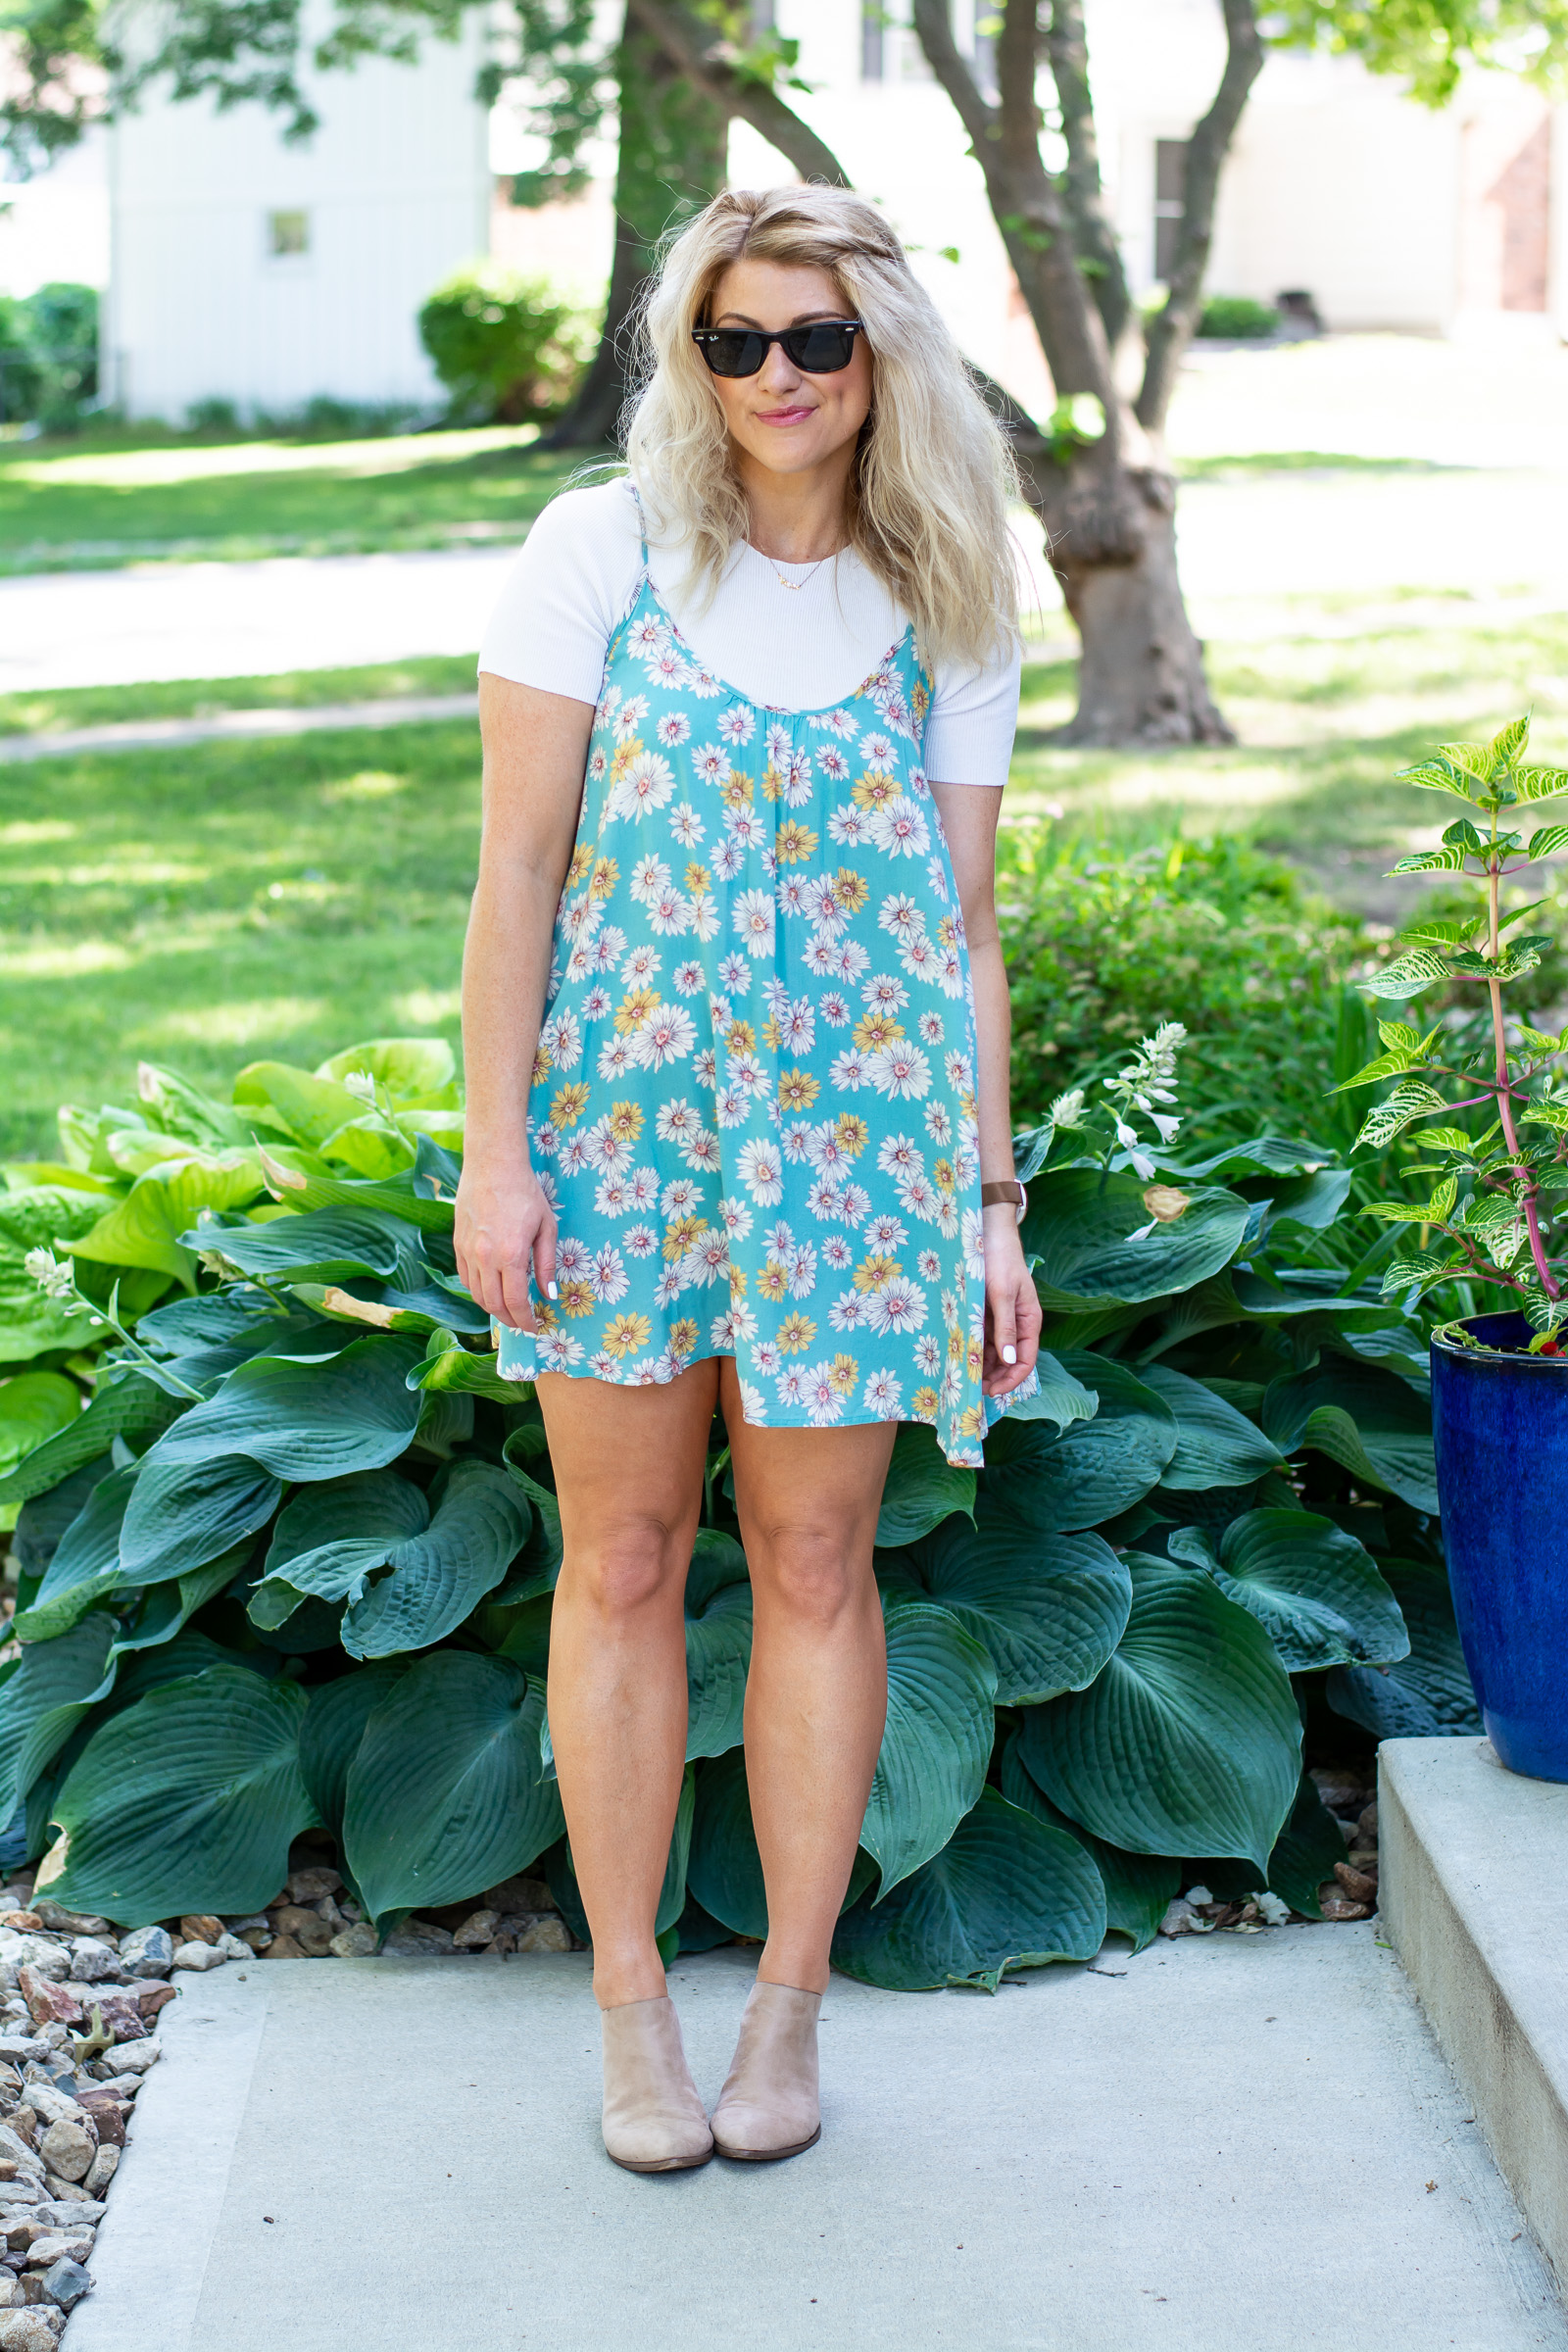 Summer Outfit: 90s Daisy Dress + Crop Top. | Le Stylo Rouge